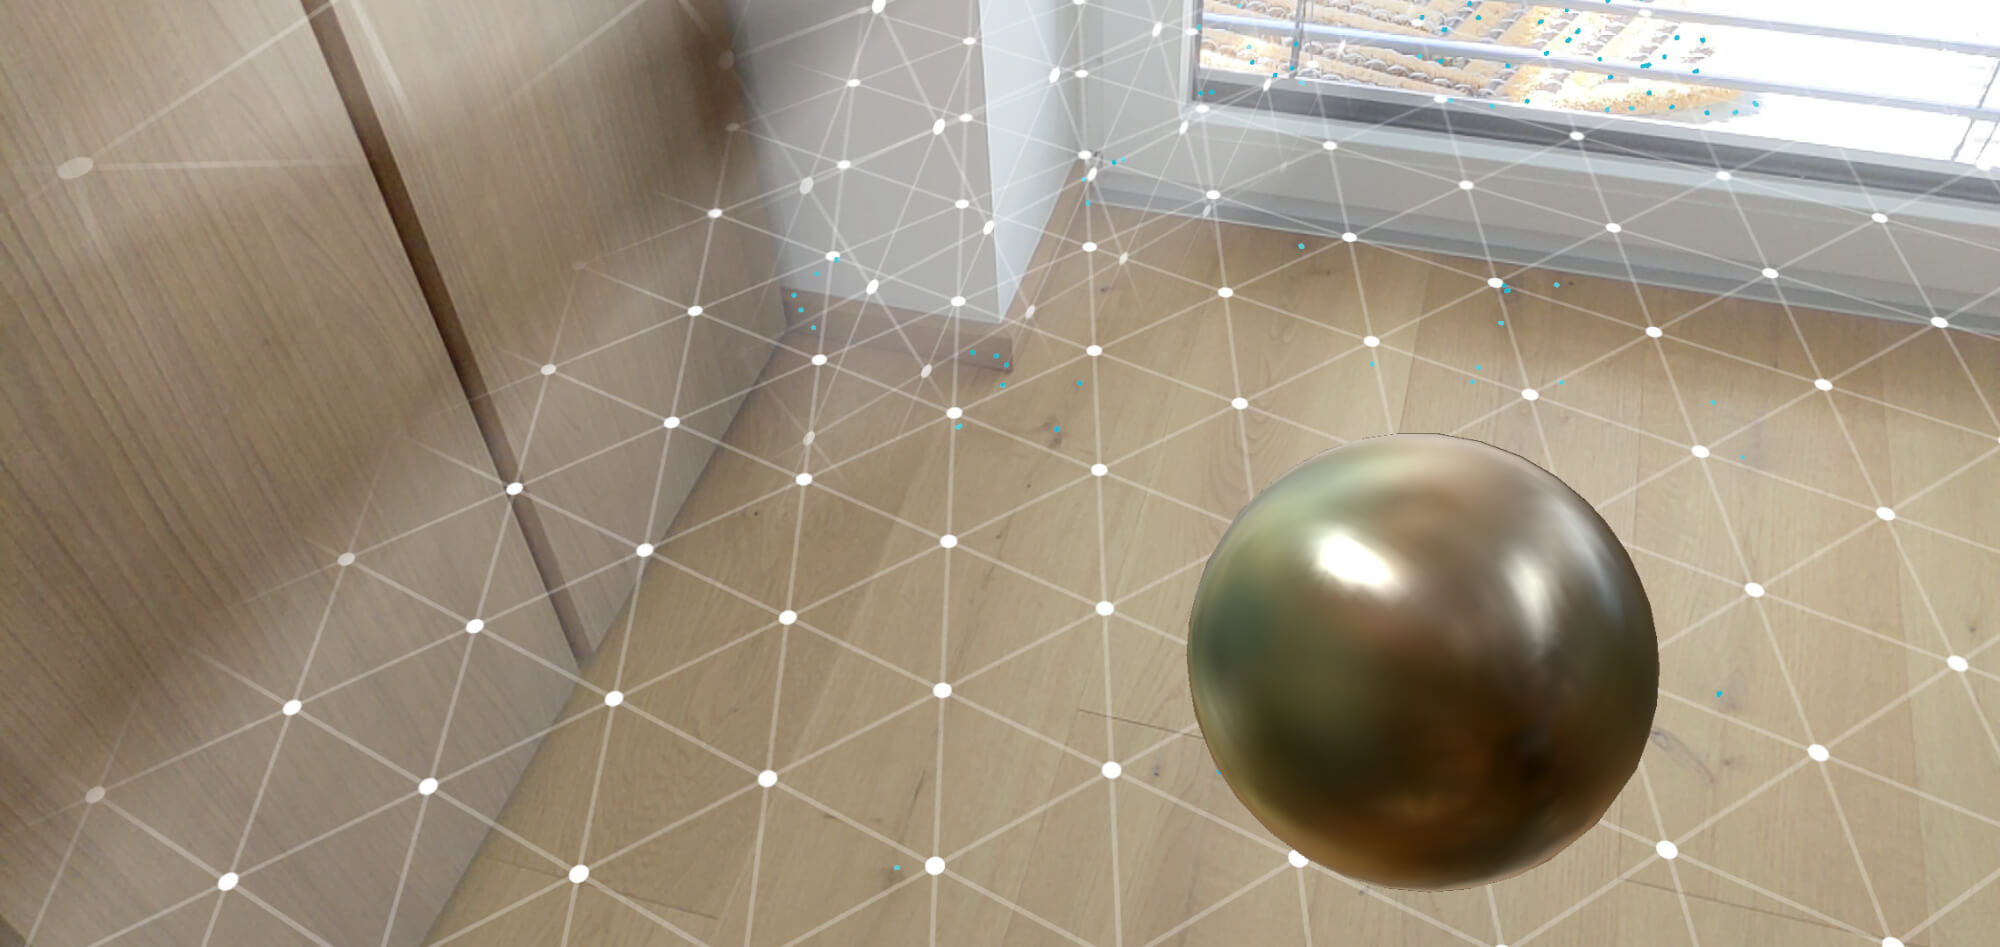 Screenshot of the reflective sphere placed in the real world, based on the Environmental HDR lighting by Google ARCore.